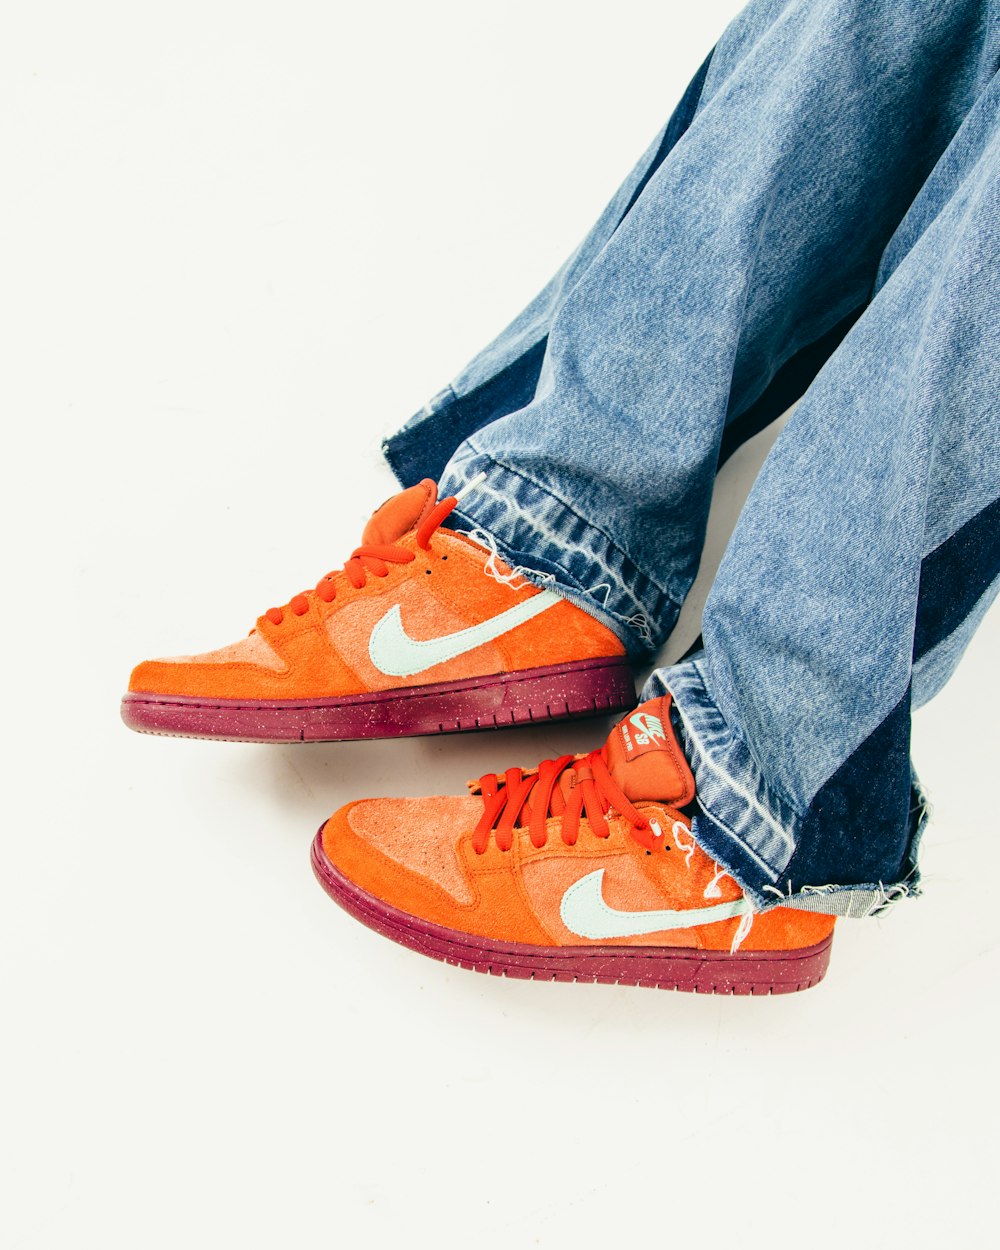 a pair of jeans and a pair of orange sneakers